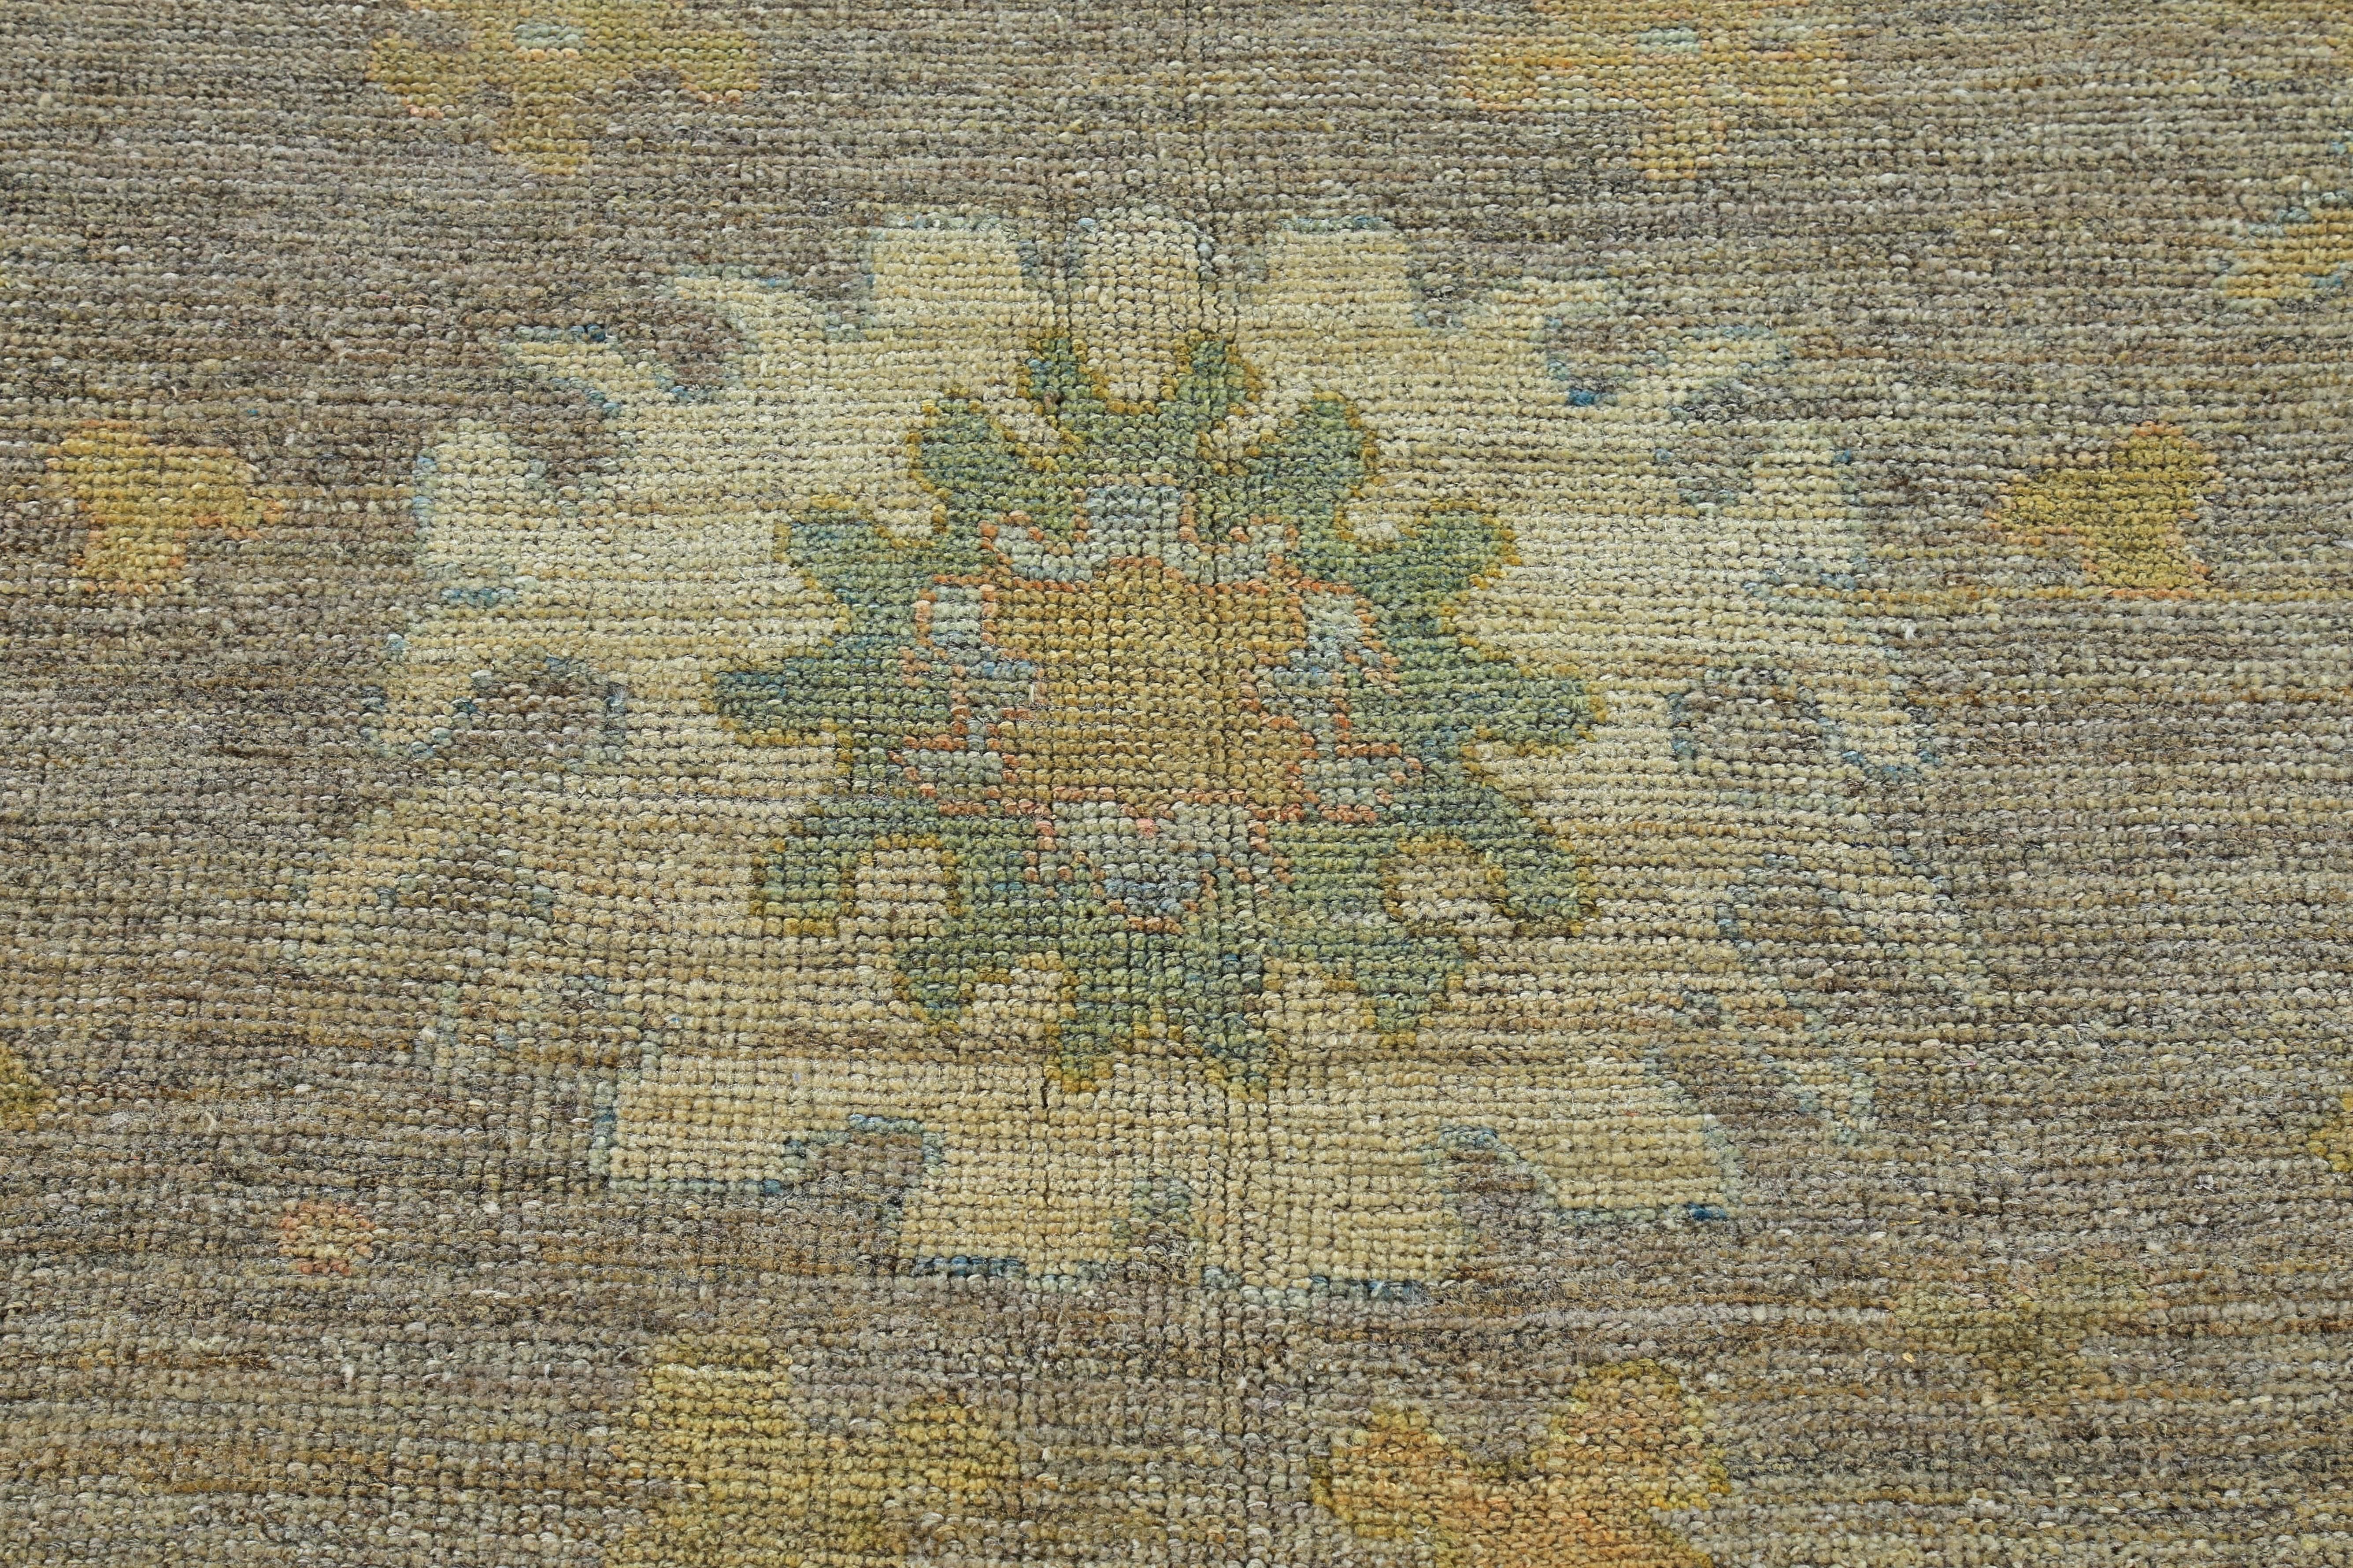 New Turkish Oushak Rug with Green and Yellow Floral Design on a Brown Field For Sale 1